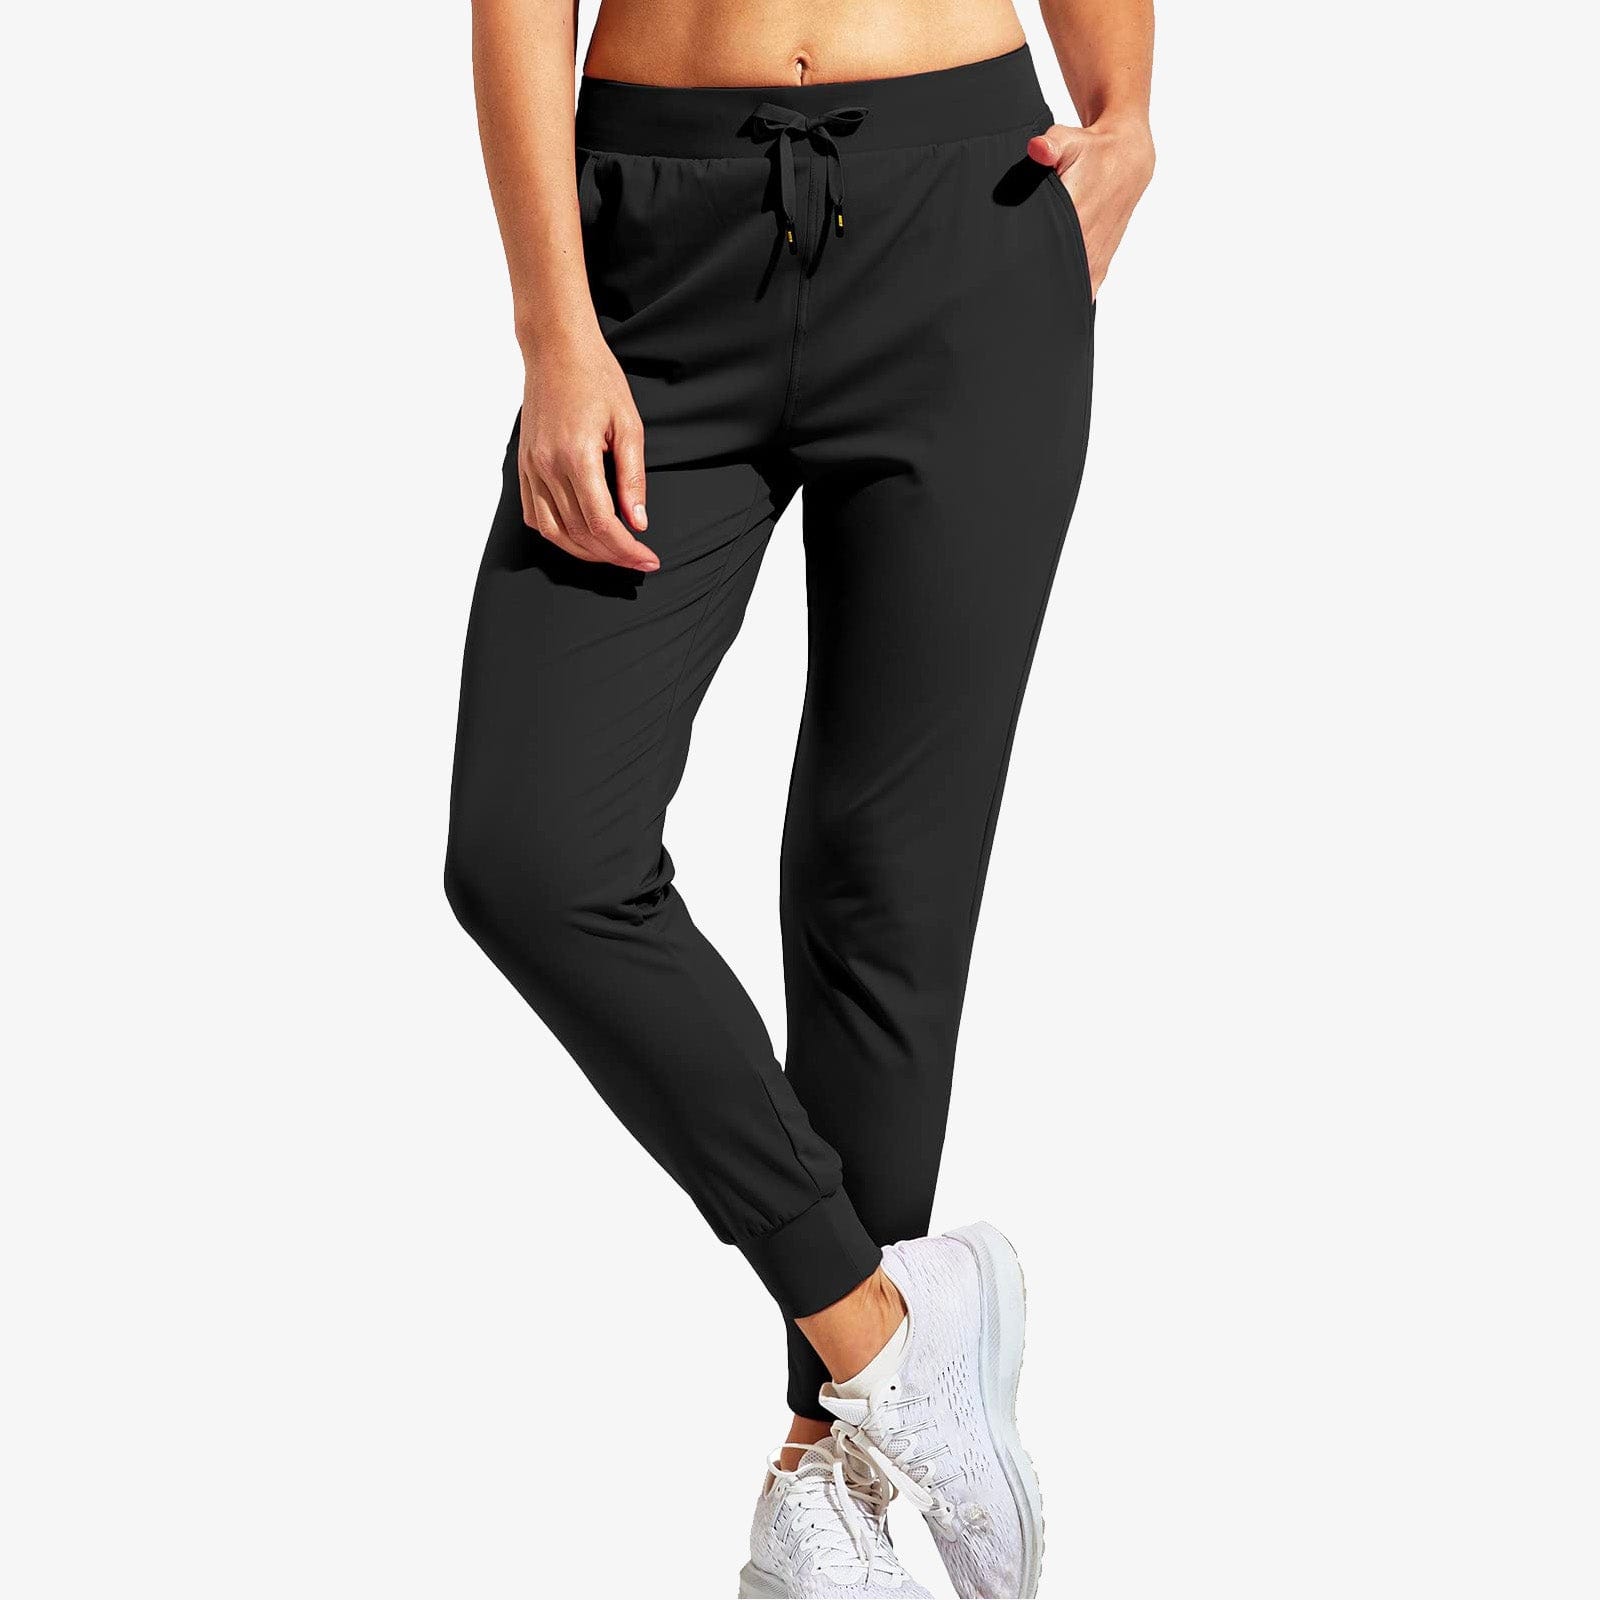 Women Joggers with Pockets Lightweight Athletic Sweatpants Women Active Pants Black / XS MIER